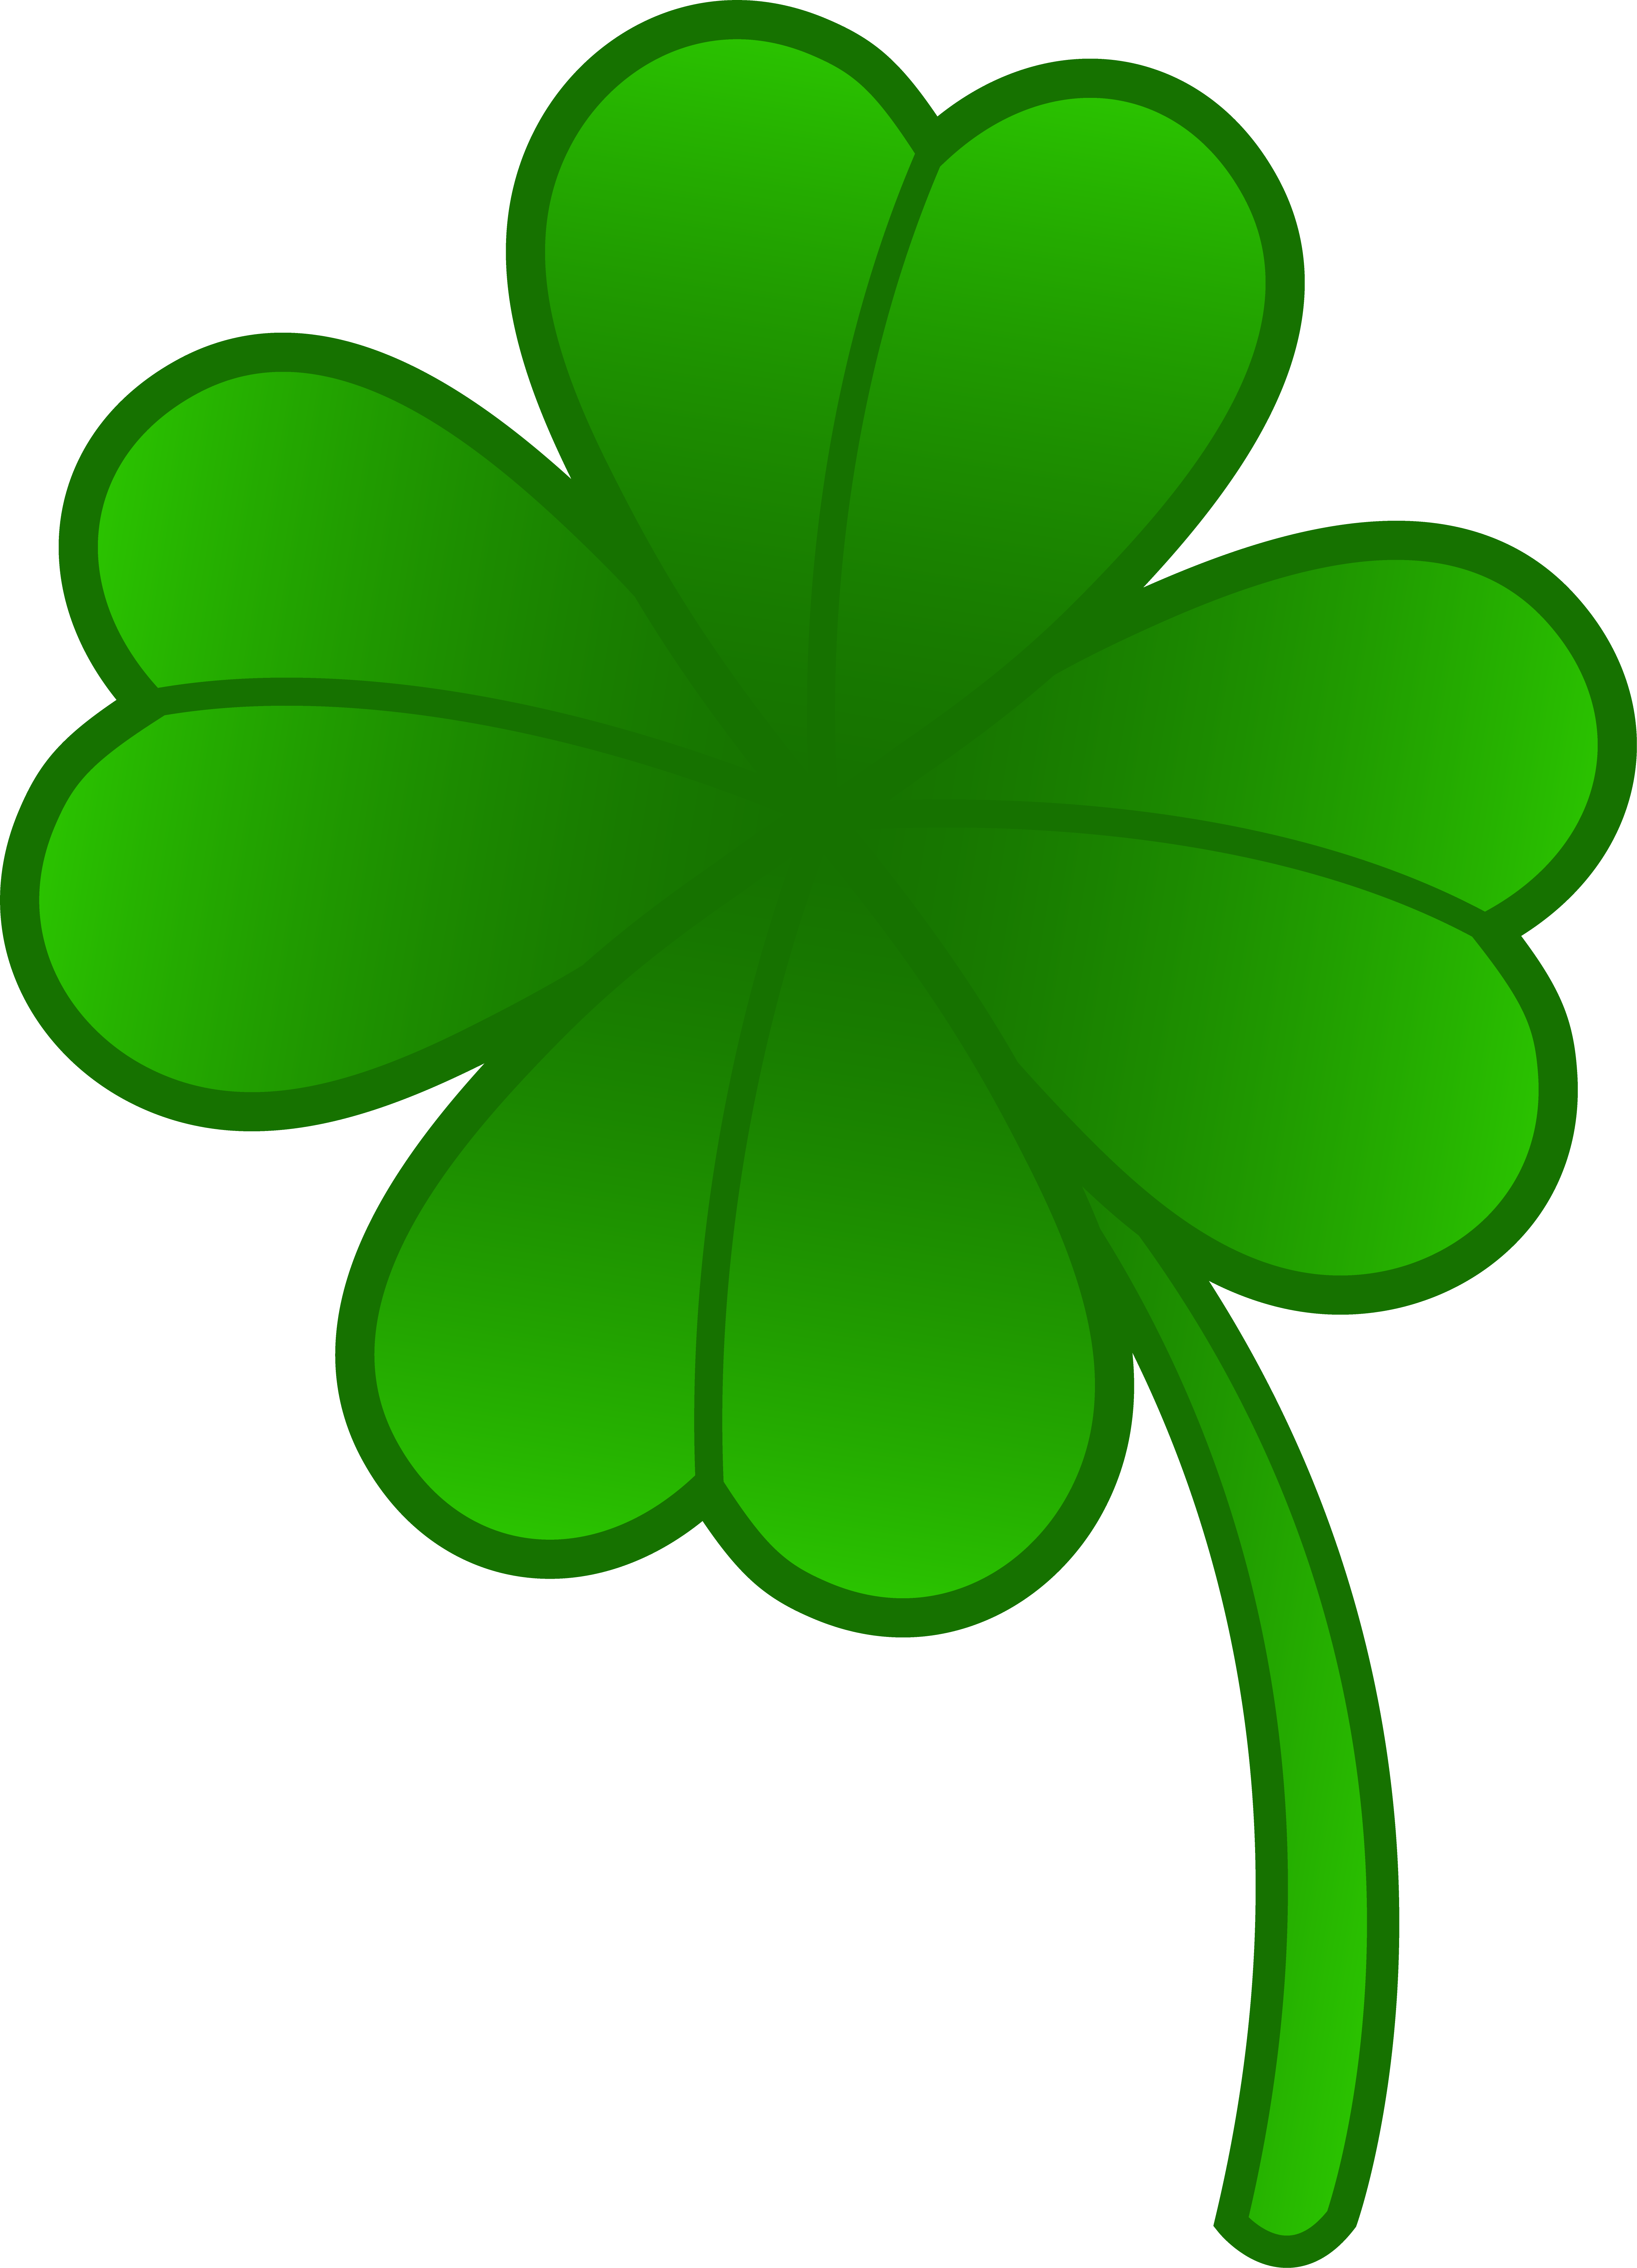 Clovers PNG HD Quality